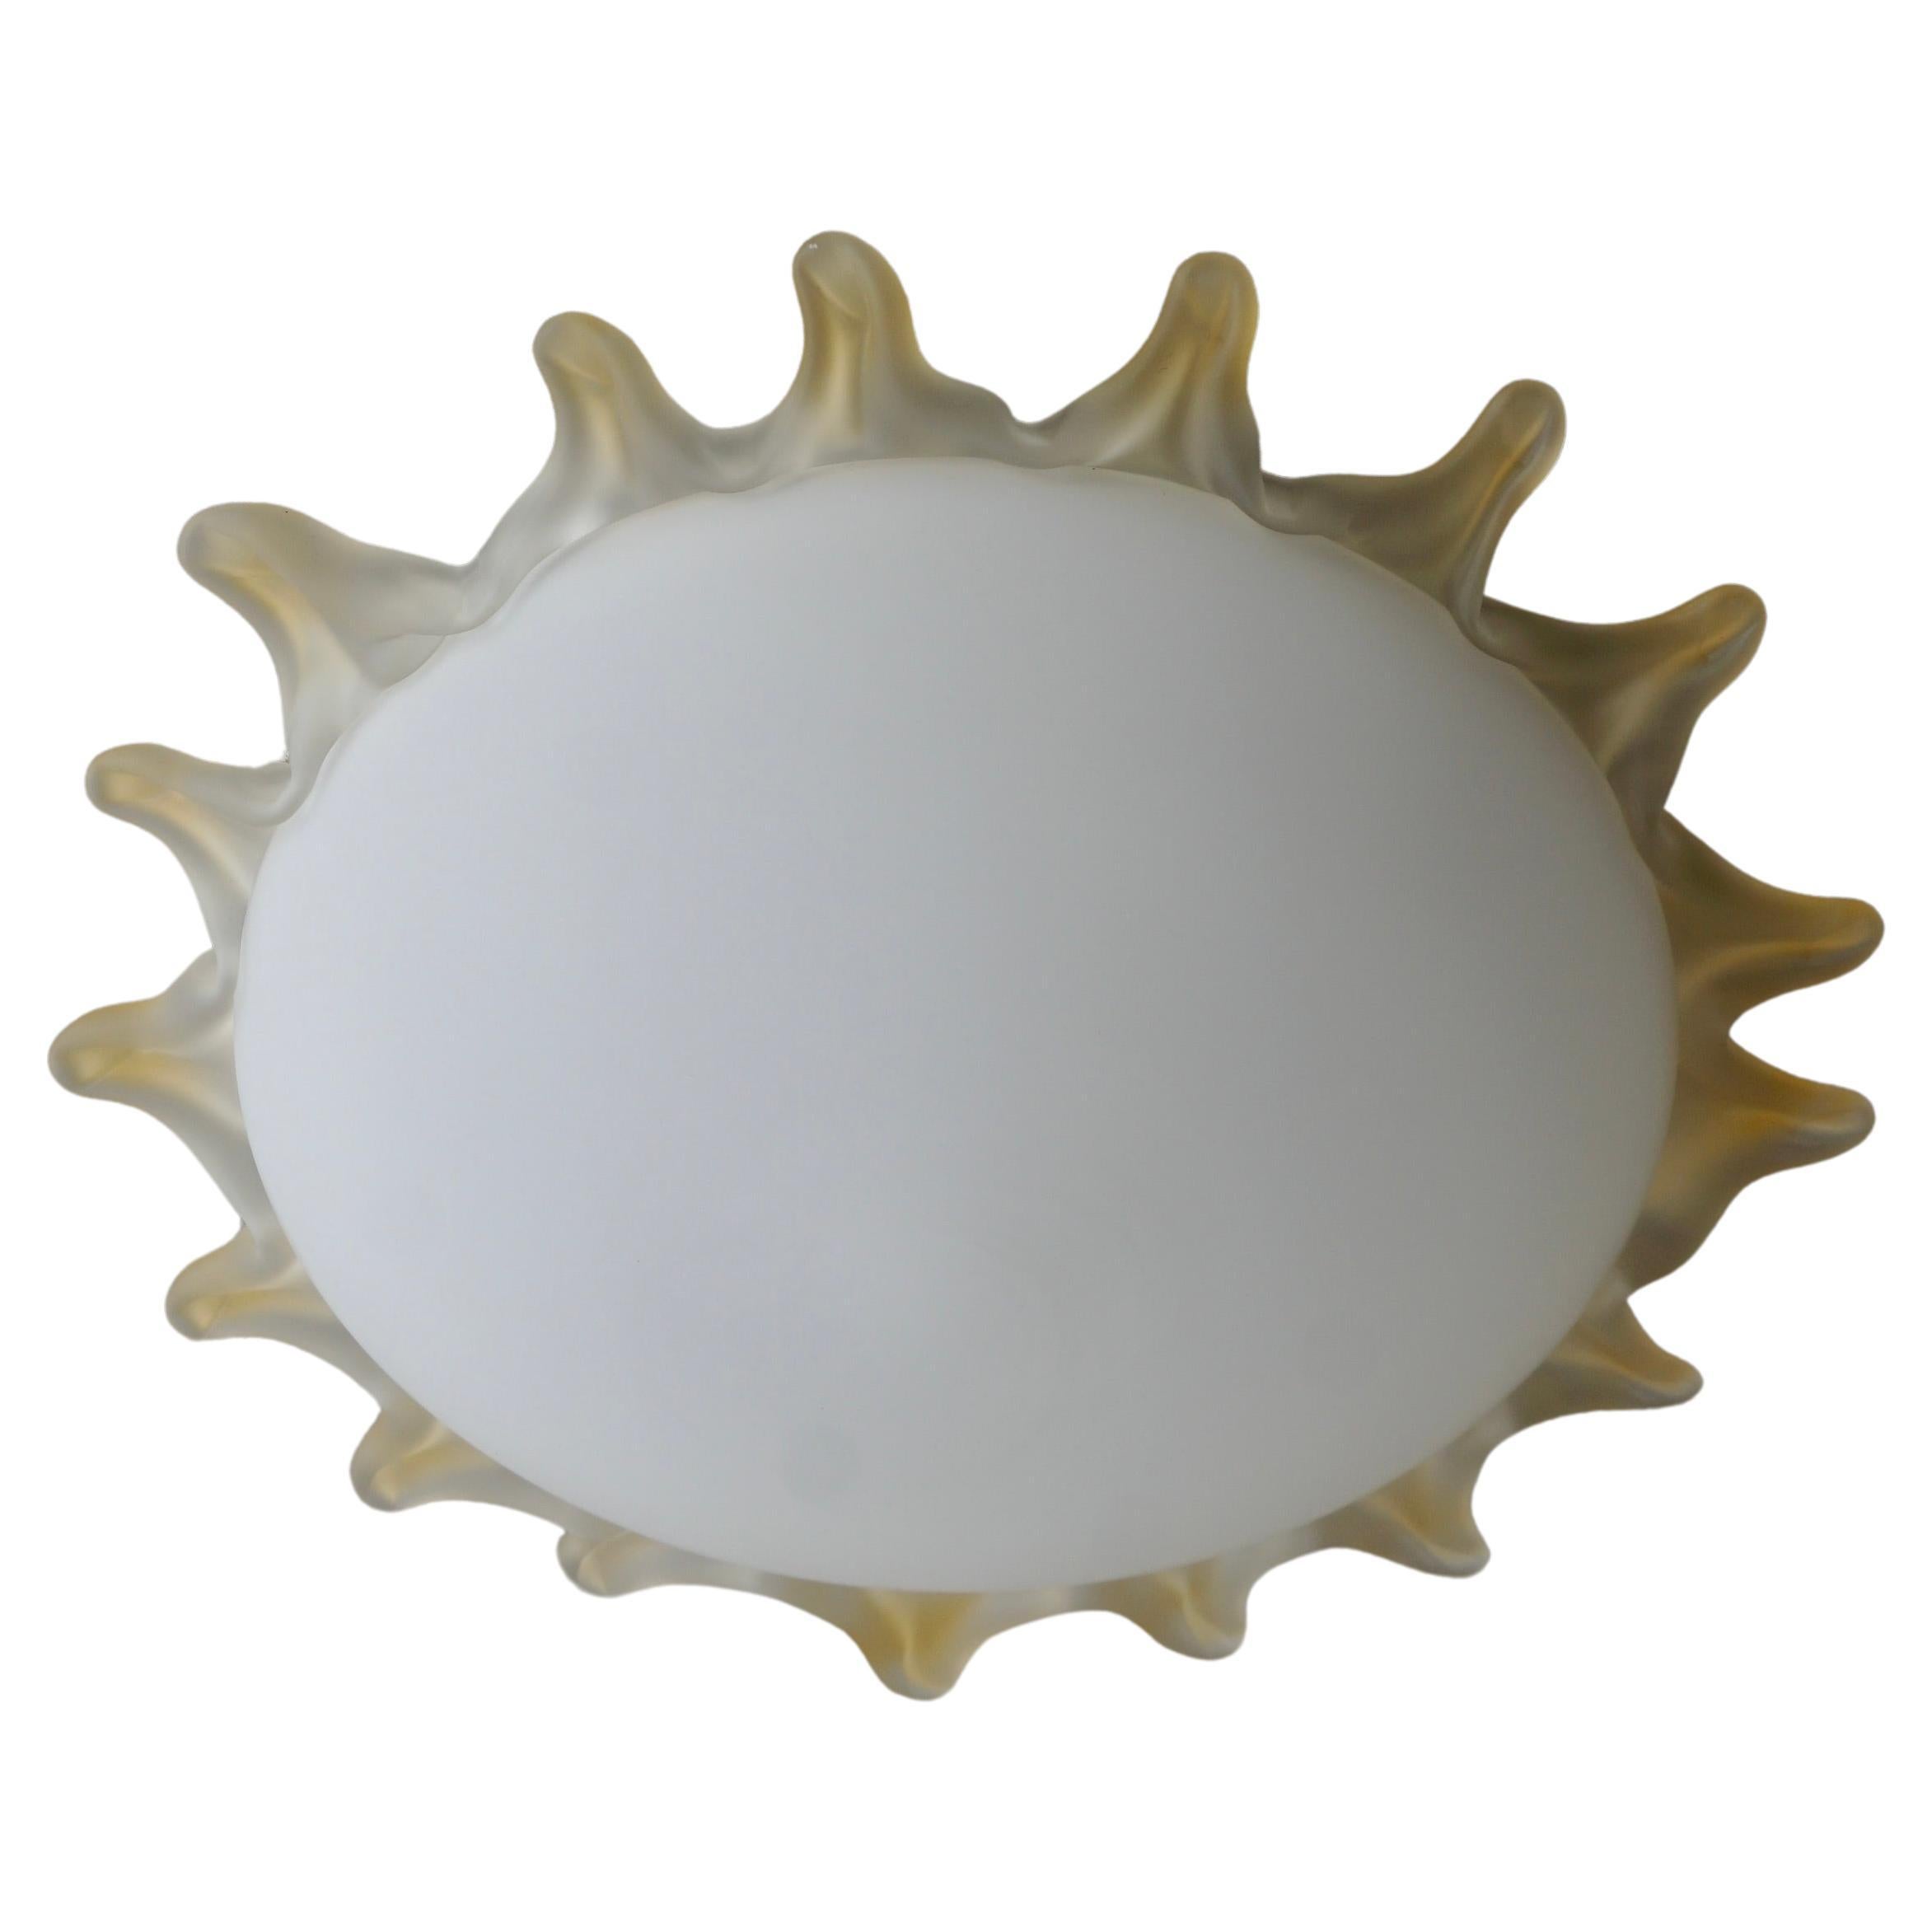 Italian Murano glass ceiling lamp in the shape of a sun. and it can of course also be used as a wall lamp, sconce.

The flush mount has one socket for incandescent lamp with screw base or E27 type LEDs. It is possible to install this fixture in all